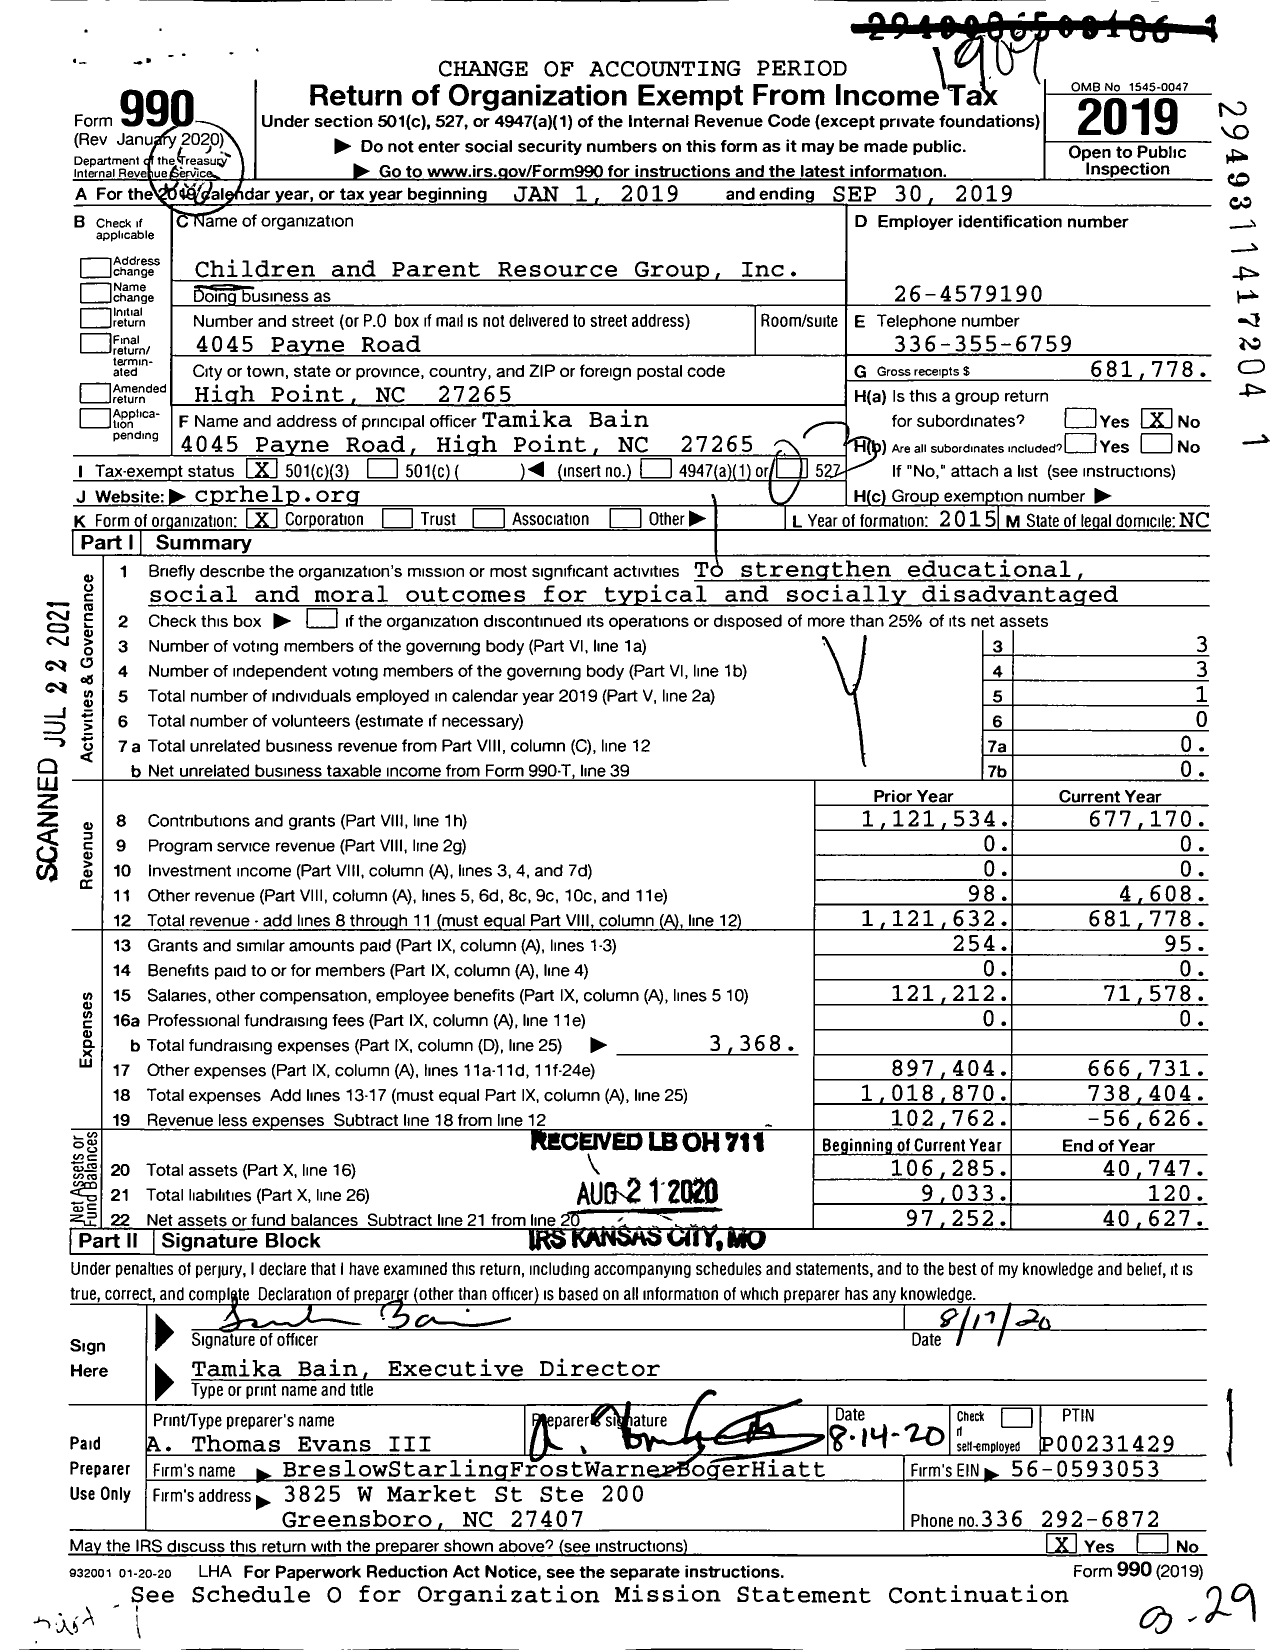 Image of first page of 2018 Form 990 for Children and Parent Resource Group